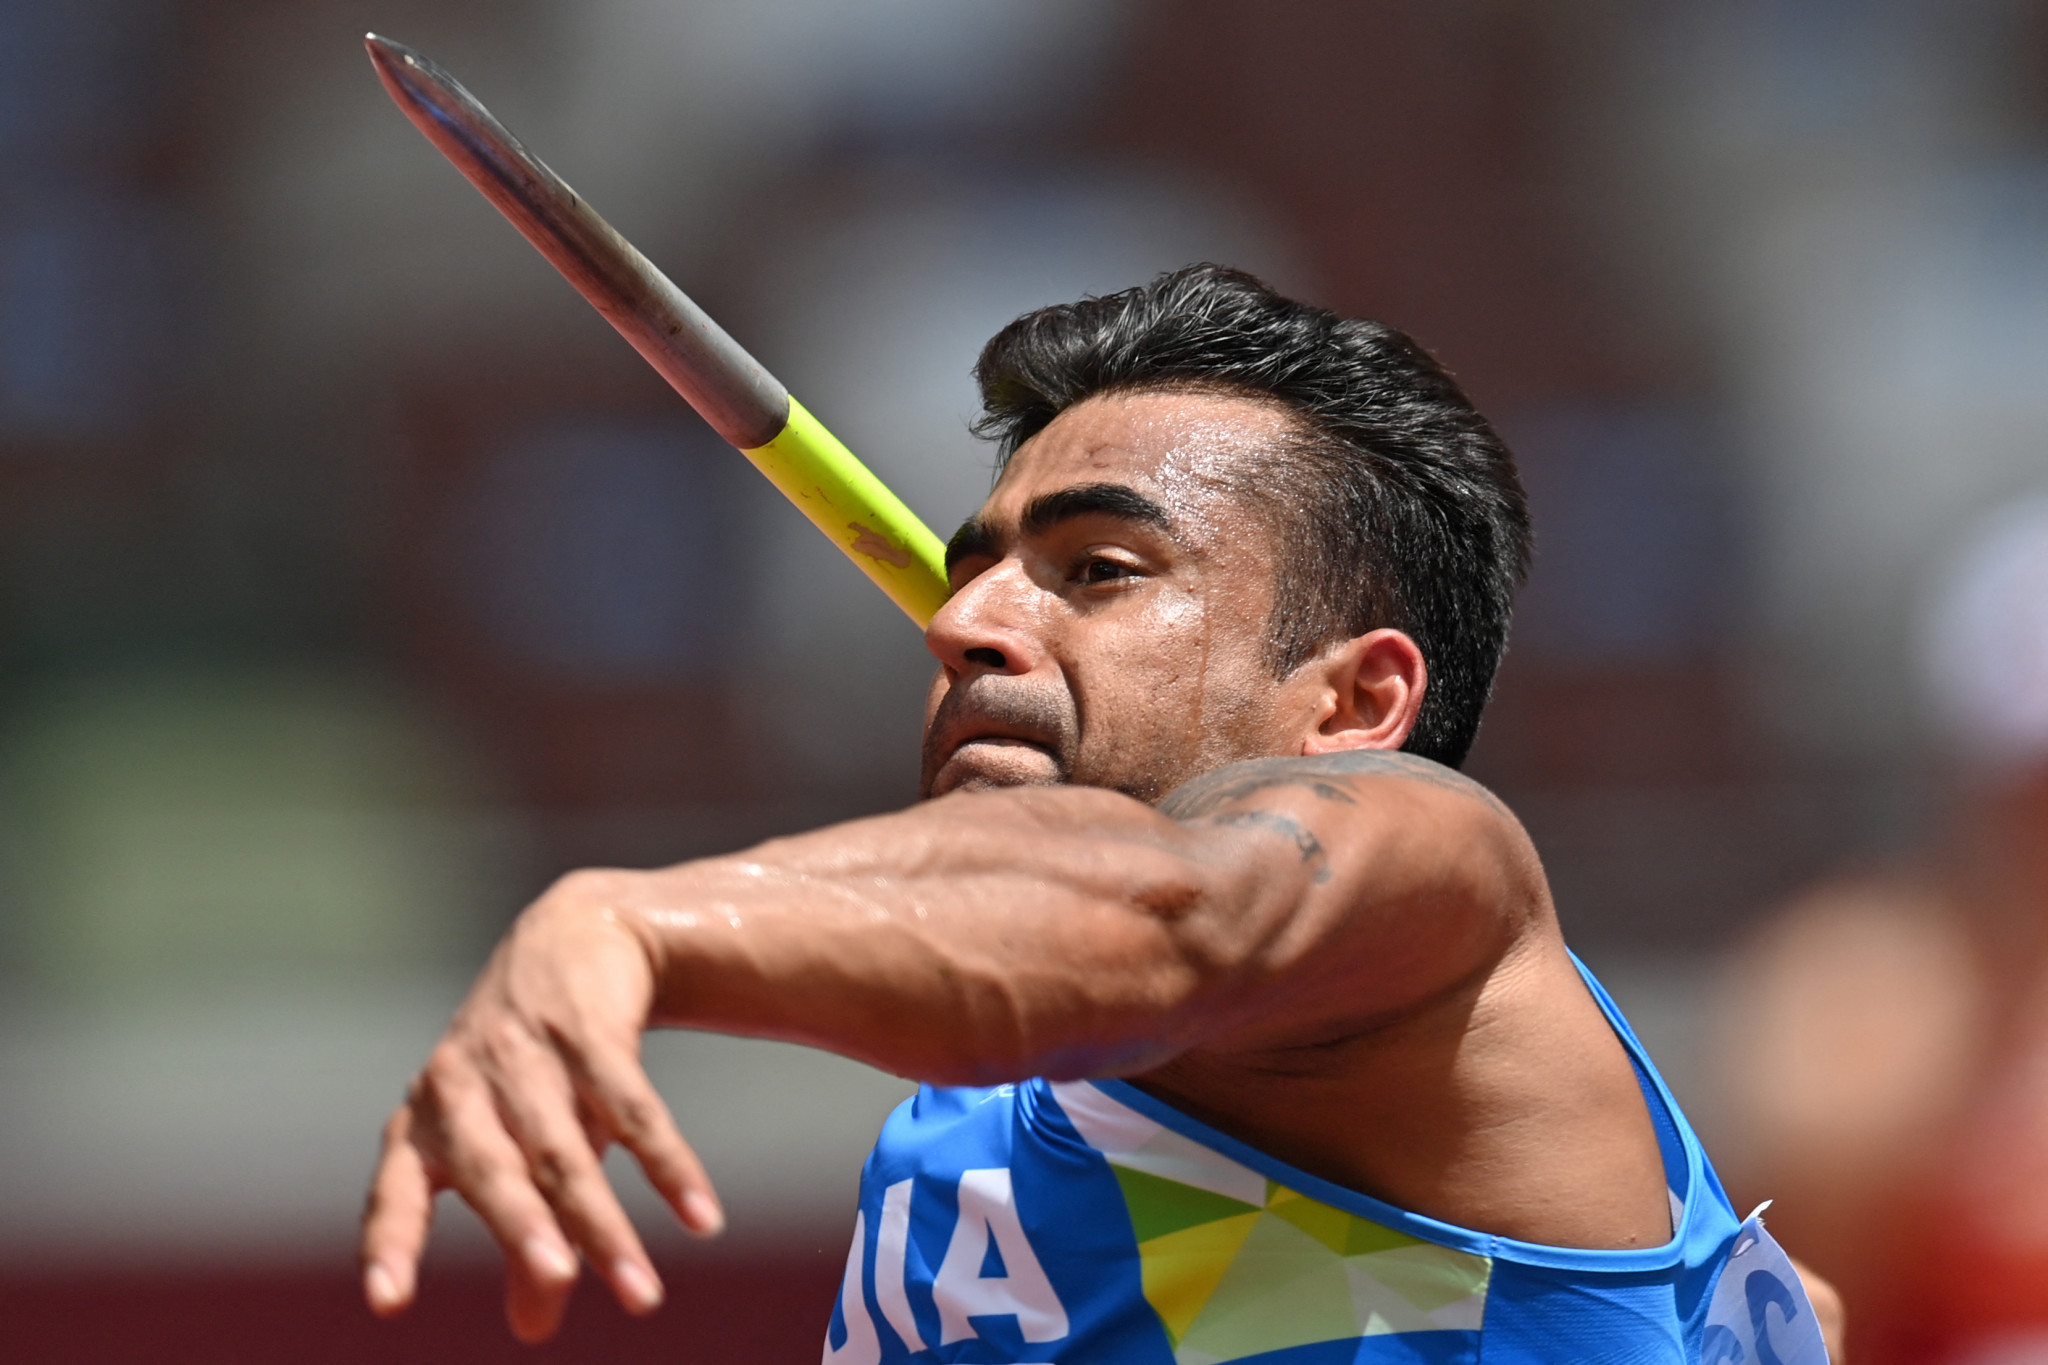 Exclusive: Decision to reduce ban on Indian javelin thrower from four years to one reviewed by AIU